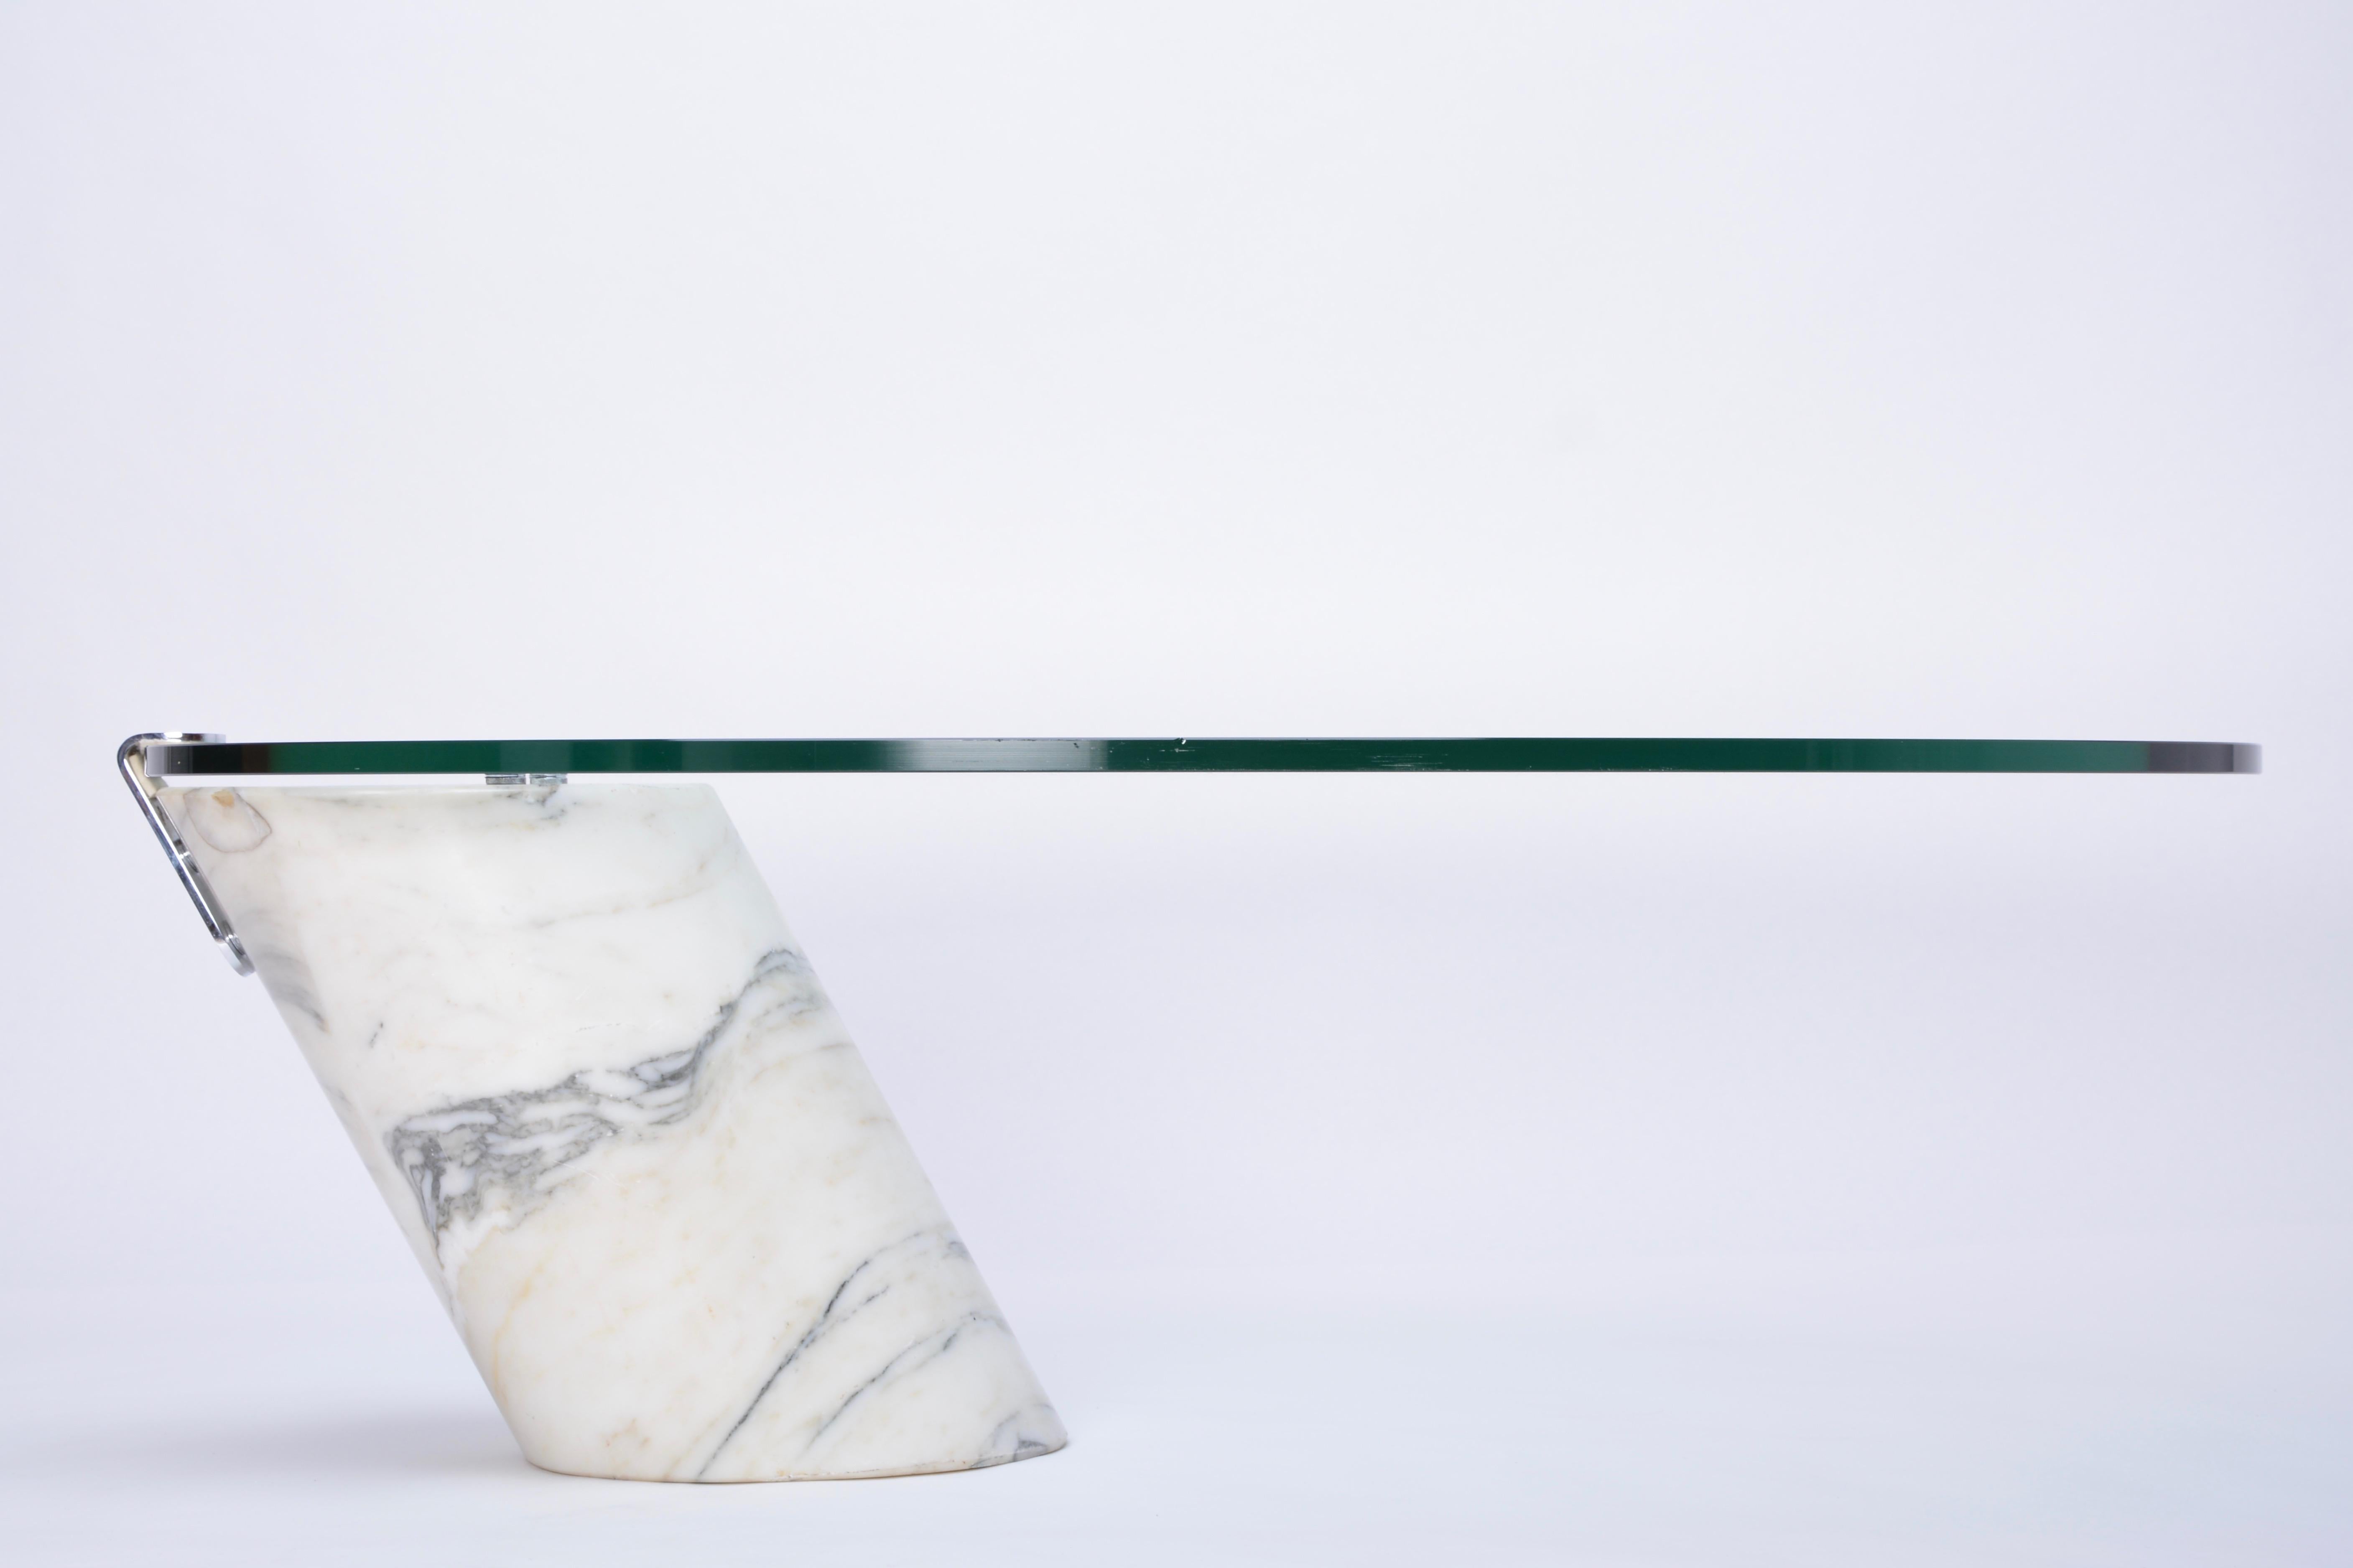 White Marble and Glass Coffee Table Model K1000 by Team Form for Ronald Schmitt

Coffee table designed by Team Form for Ronald Schmitt in the 1970s. The base of this table is made from solid marble. The thick oval glass top lays loose on the marble